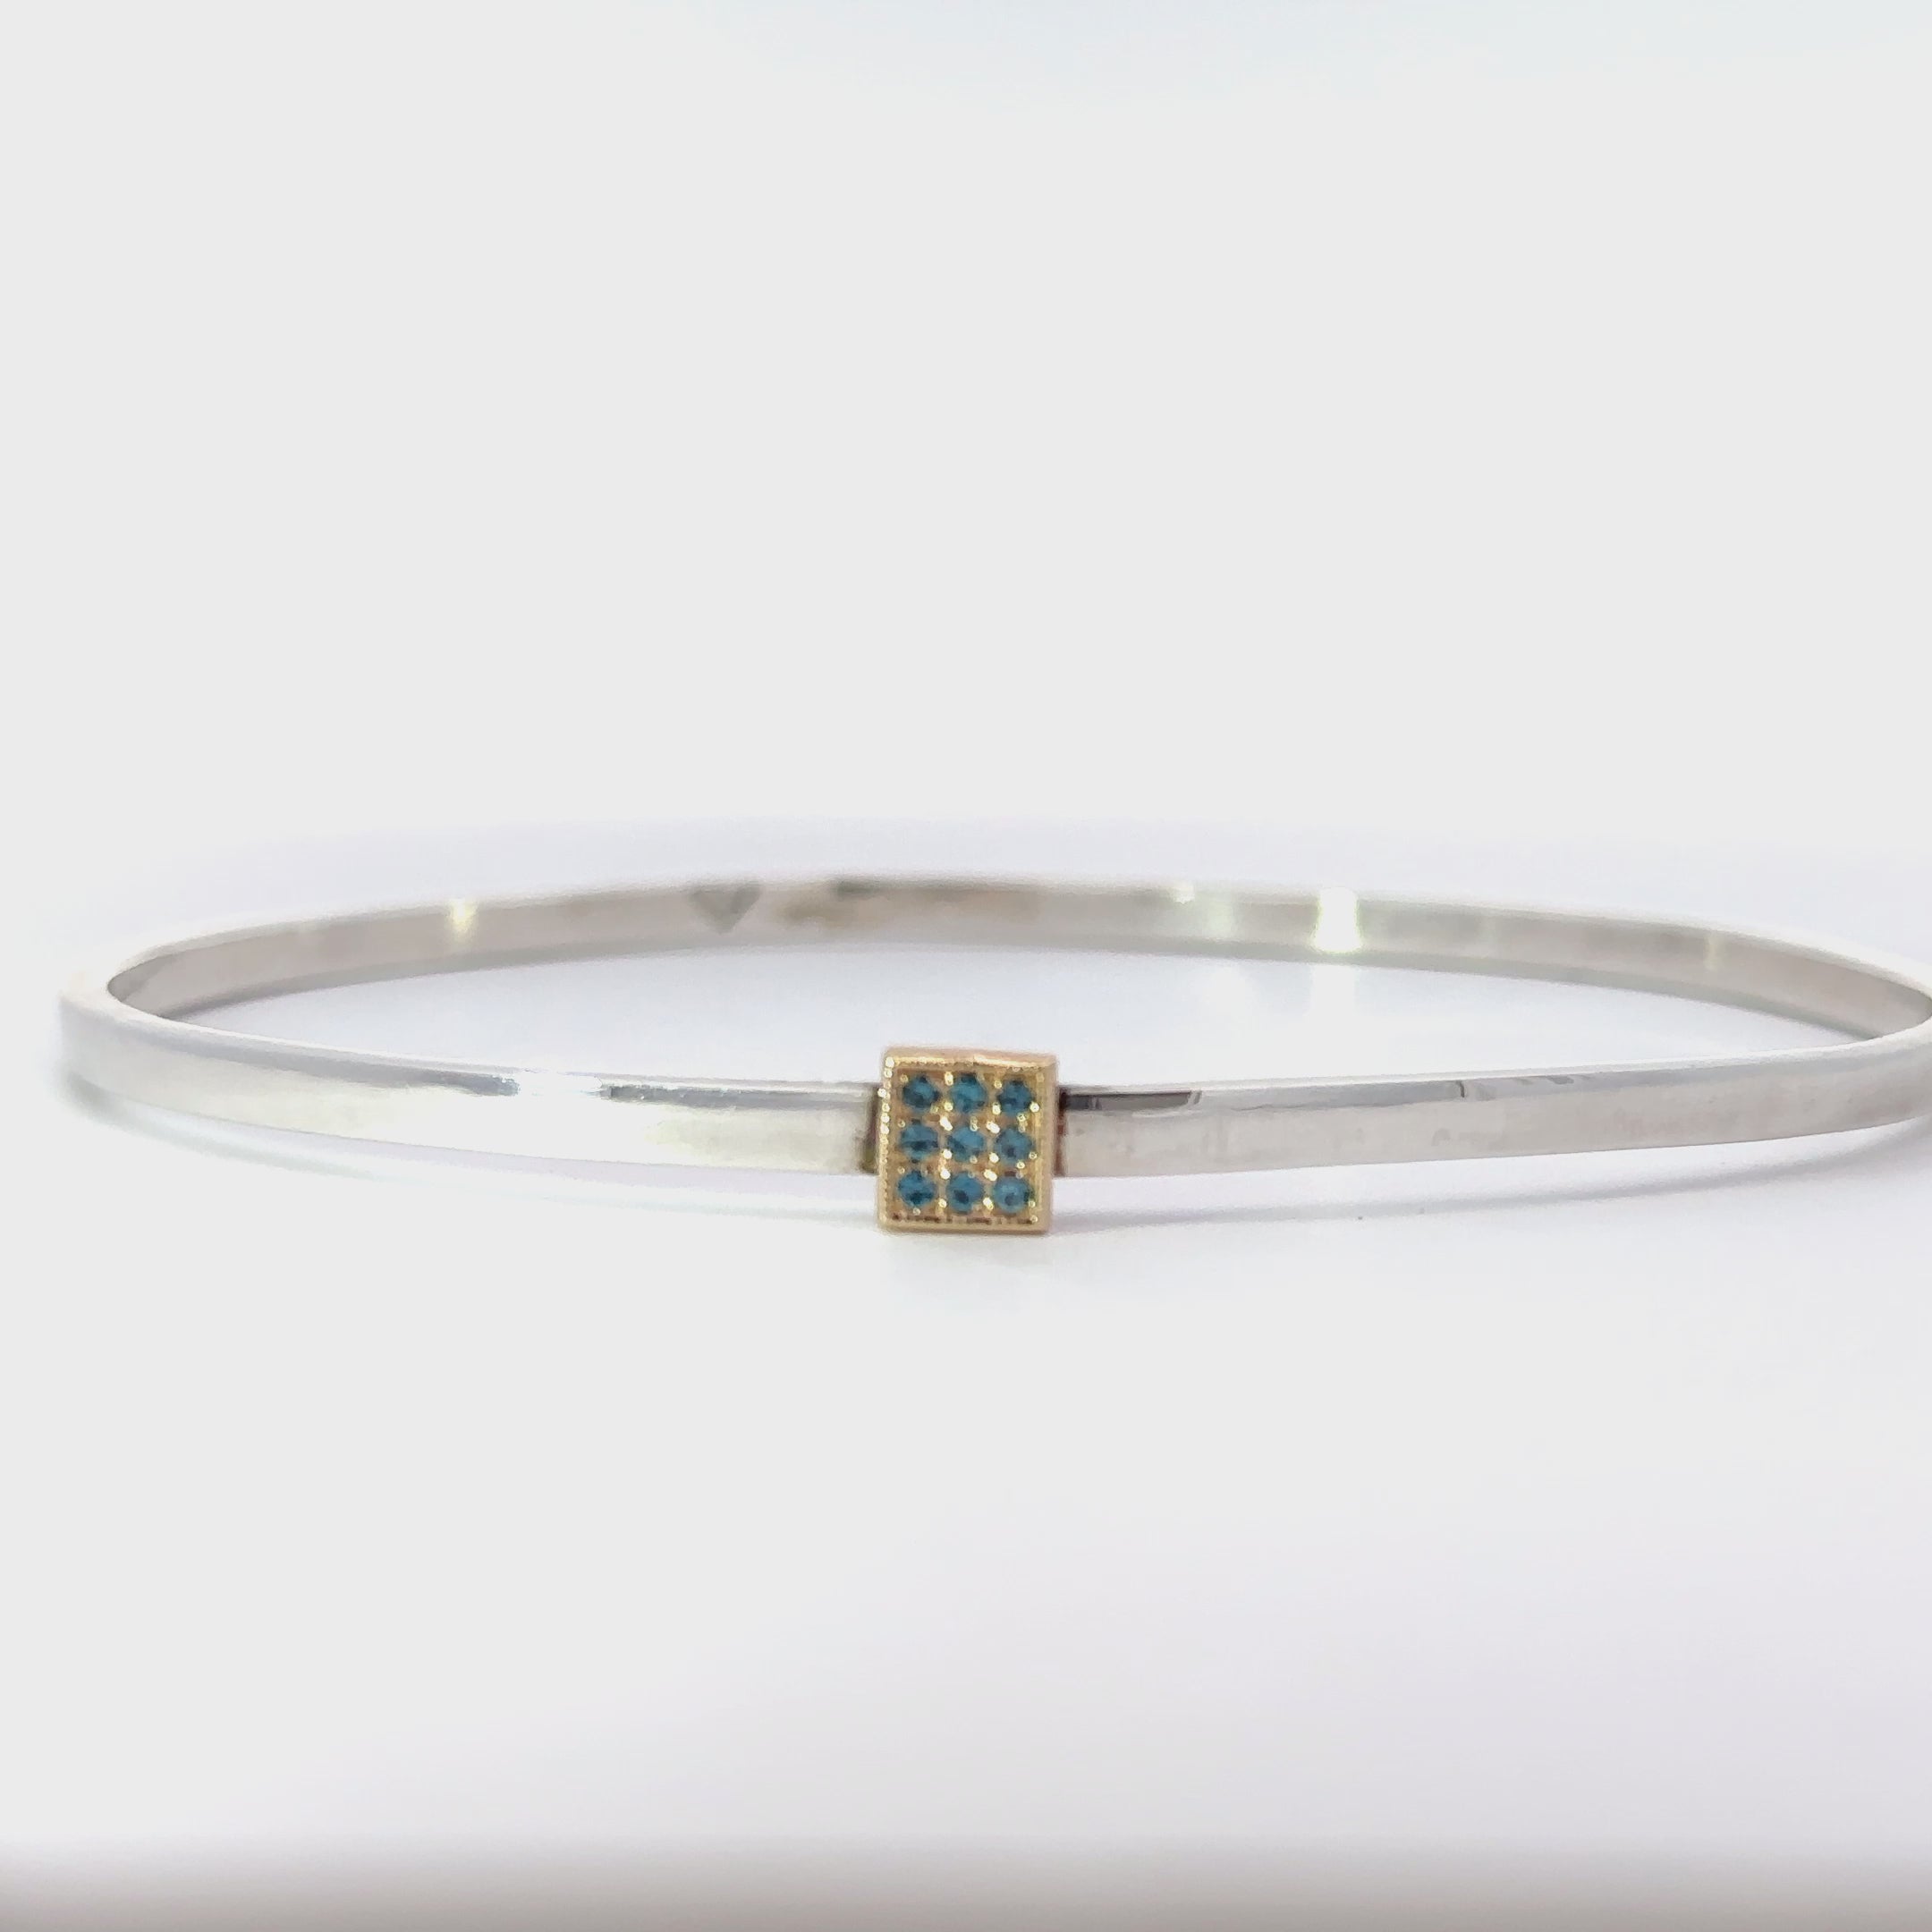 Custom sterling bangle with london blue topaz accent